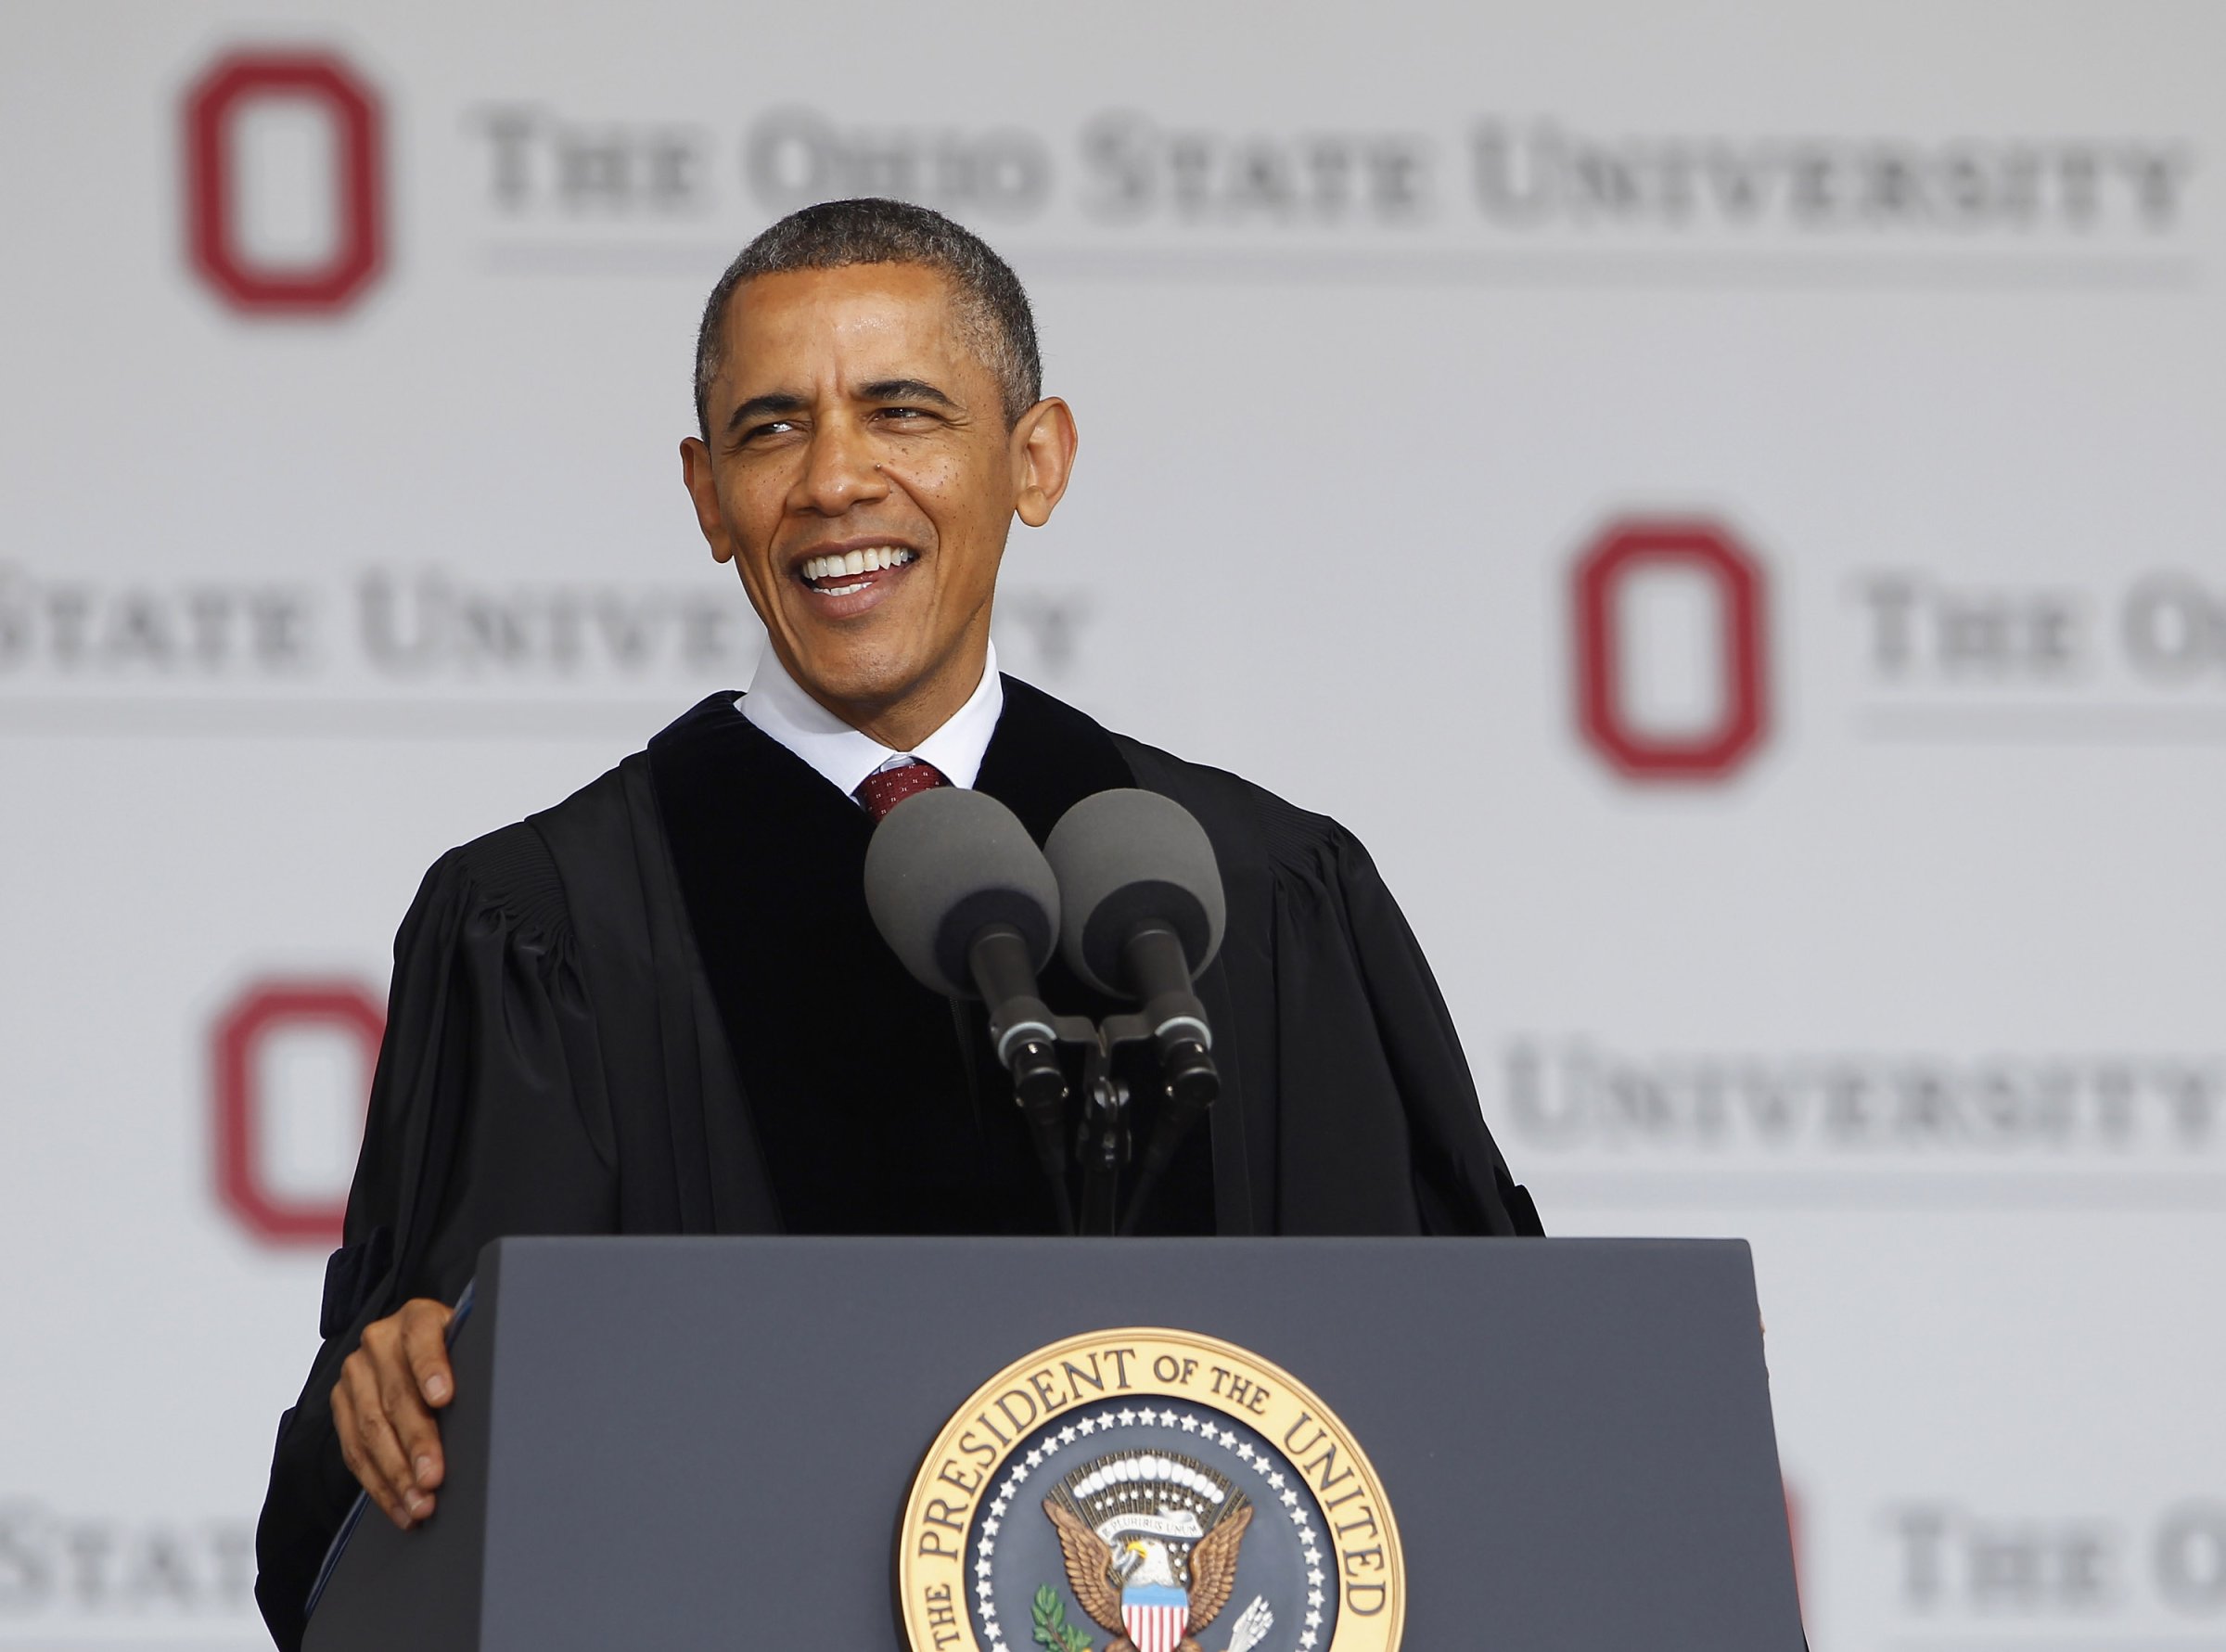 President Obama Gives Commencement Address At Ohio State University